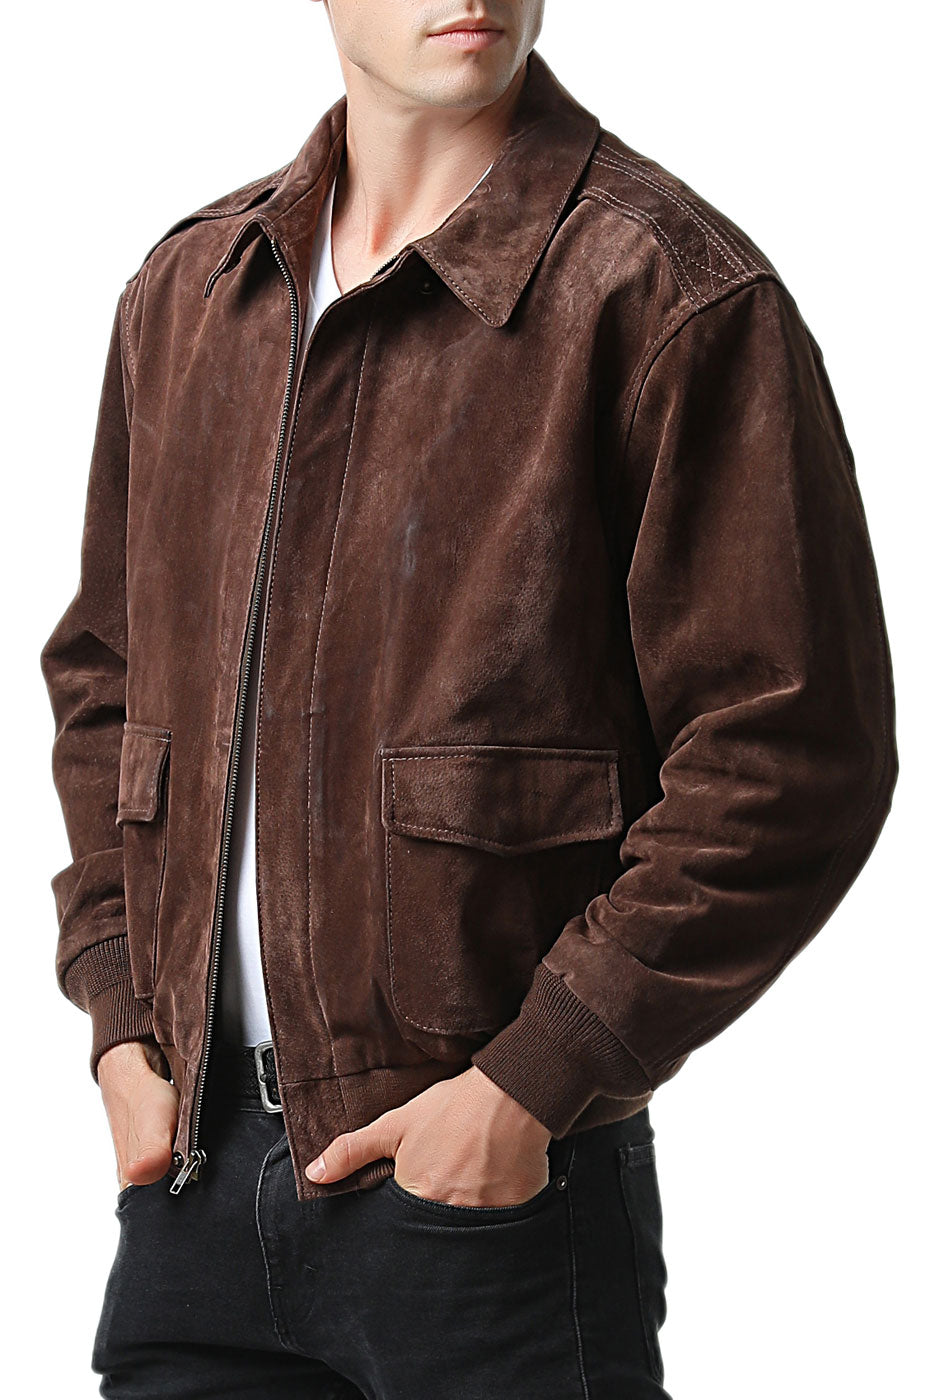 Landing Leathers Men Air Force A-2 Suede Leather Flight Bomber Jacket